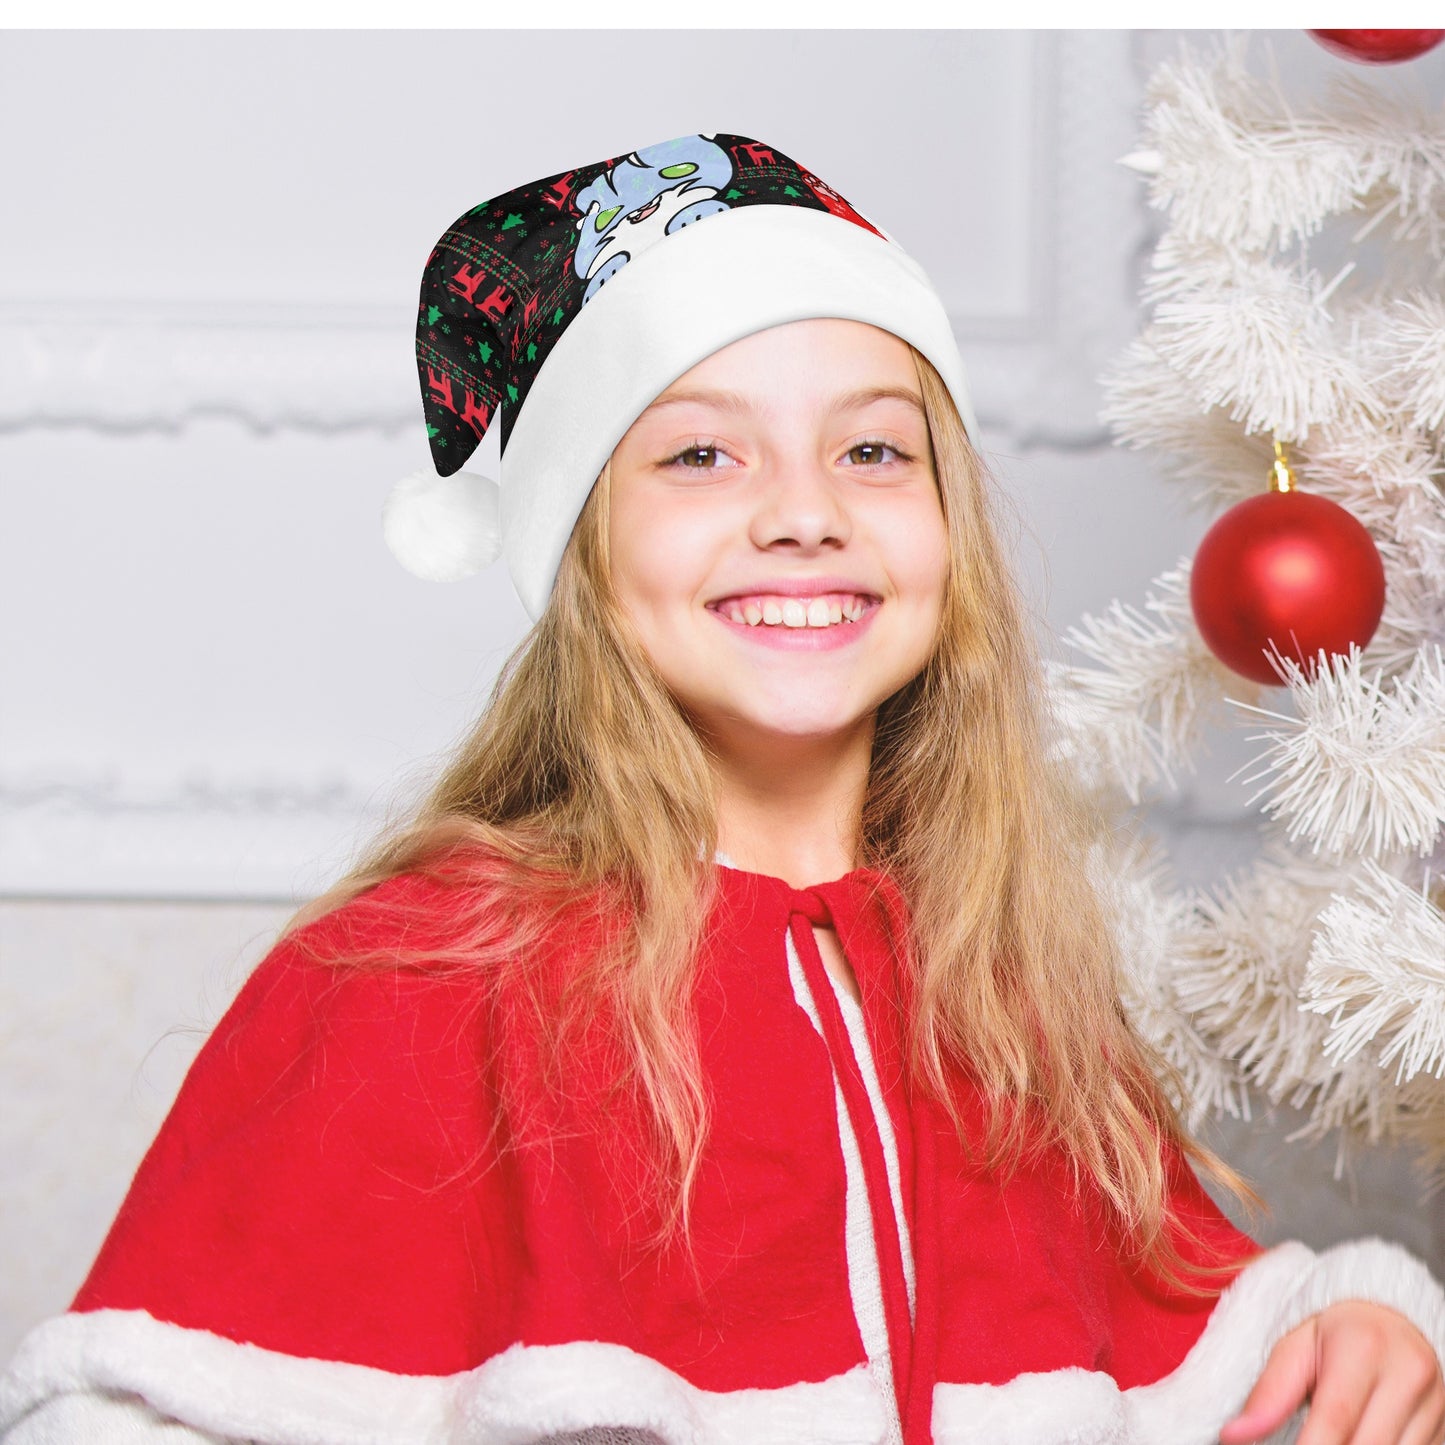 Stand out  with the  Nuggmas Christmas Santa‘s Hats  available at Hey Nugget. Grab yours today!